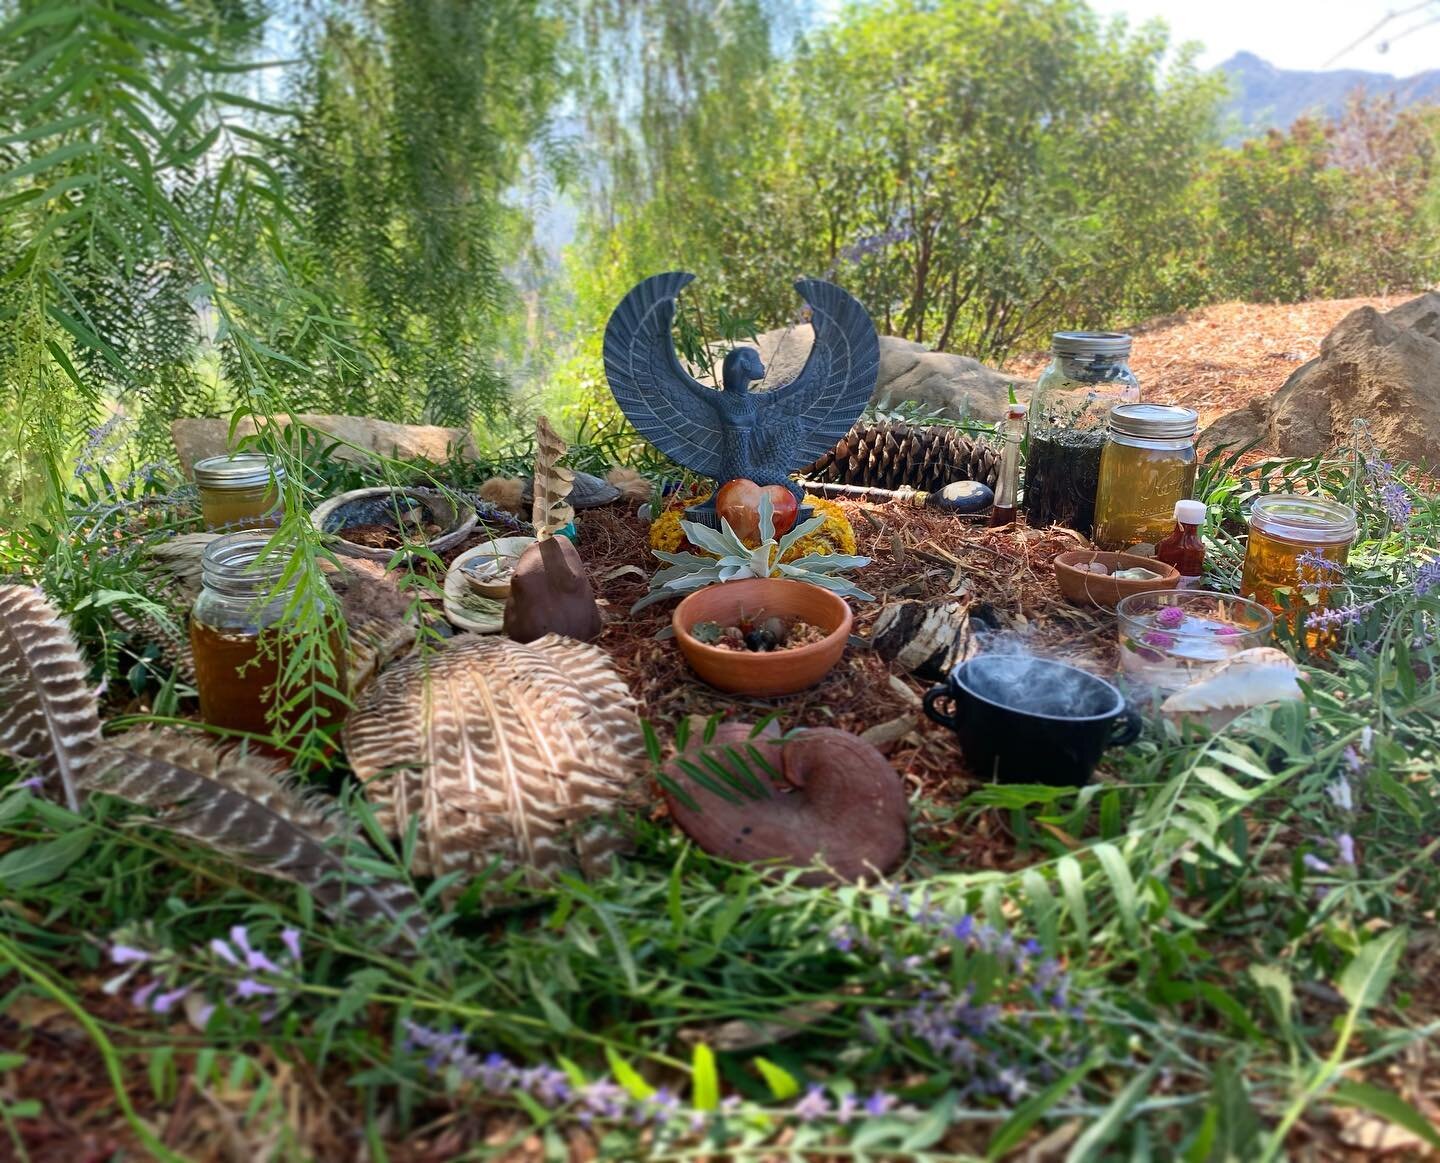 Yesterday&rsquo;s Equinox Altars &amp; home portals of love and magick ✨ #schoolofthesacredwild #herbalschool #altar #beauty #sacredspace #commune #goddessbless #herbalism #plantspiritmedicine &hearts;️ Thank you Apprentices to the Sacred Wild for sh